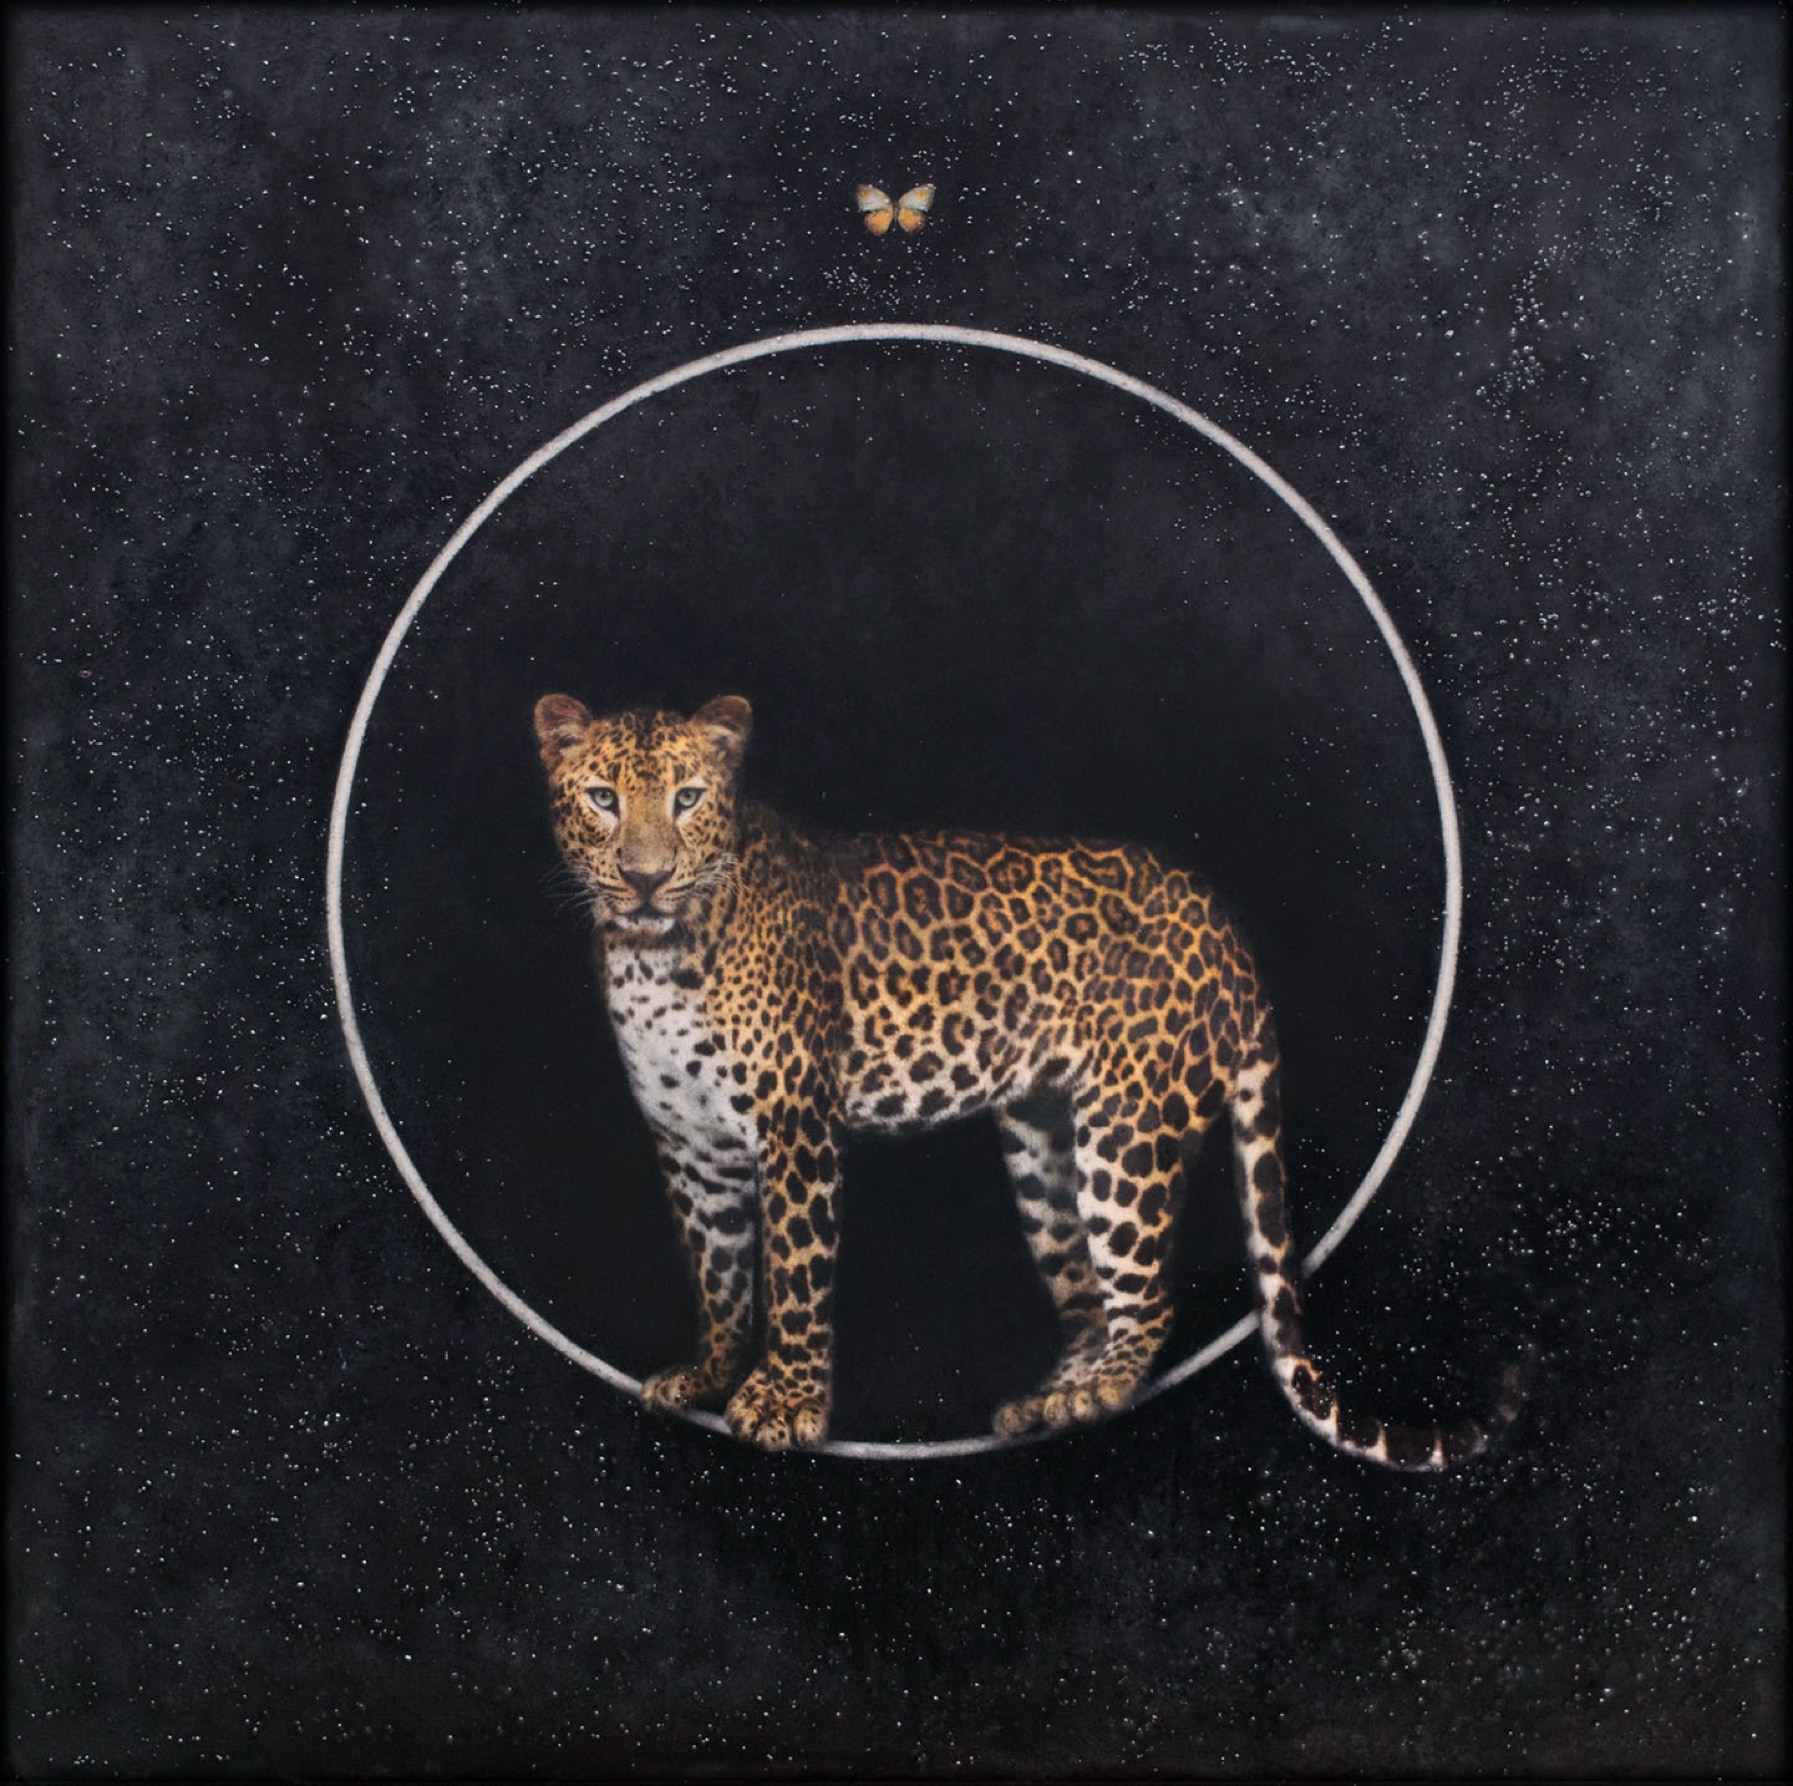 original painting of a leopard and butterfly by influential photo-encaustic artist Maggie Hasbrouck, with elements of Zen design and magical realism